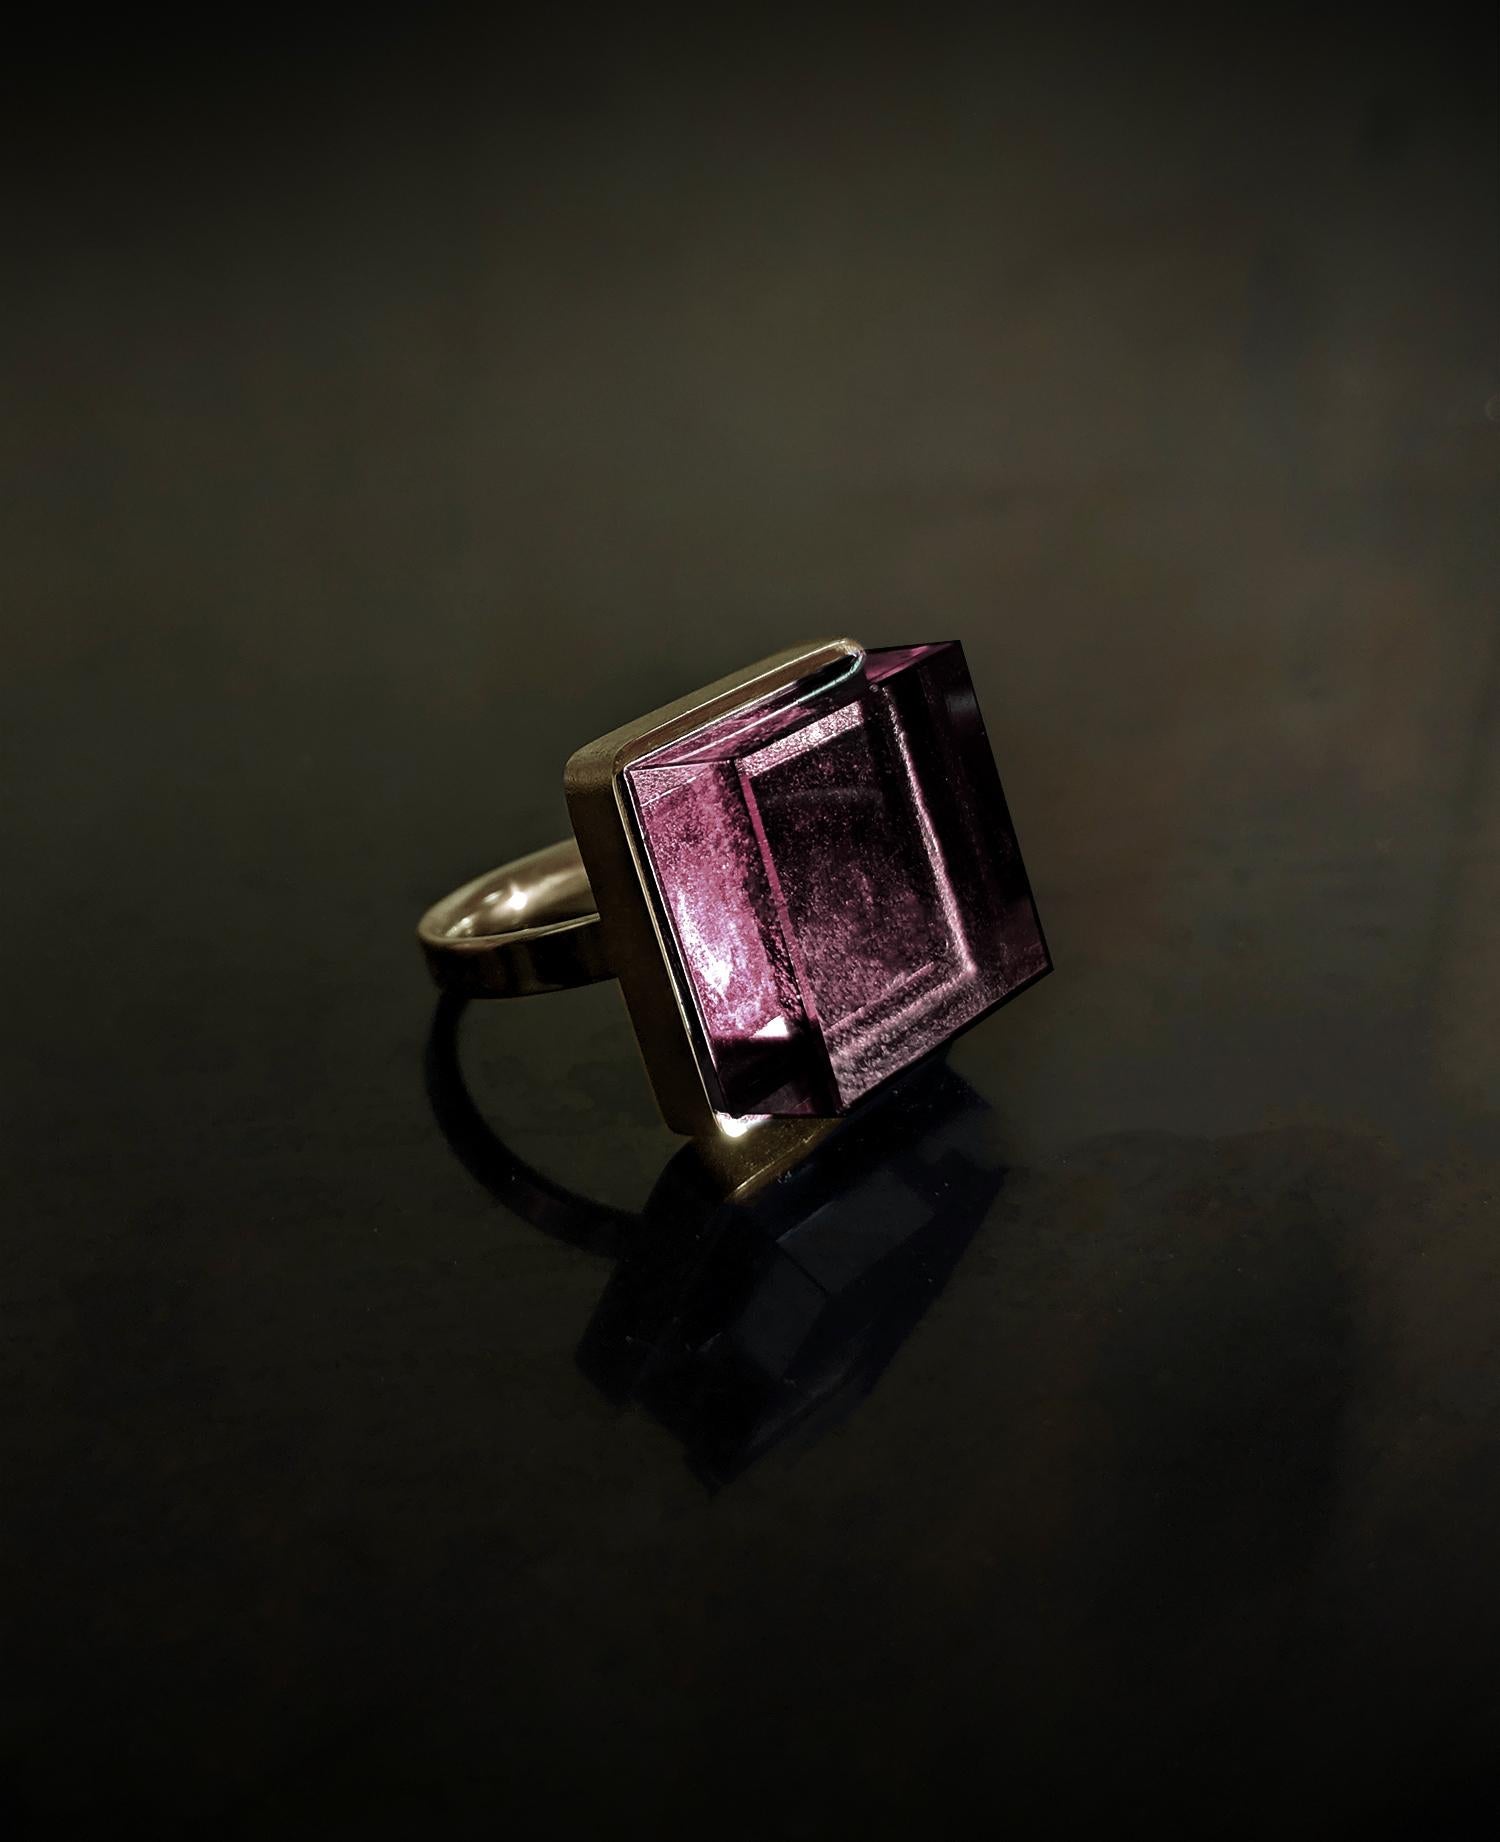 This Art Deco-inspired ring is made of 14 karat yellow gold and features a natural pink tourmaline measuring 15x15x8 mm. The ring has been featured in Harper's Bazaar and Vogue UA.

Its design is sure to inspire architects, designers, and artists.